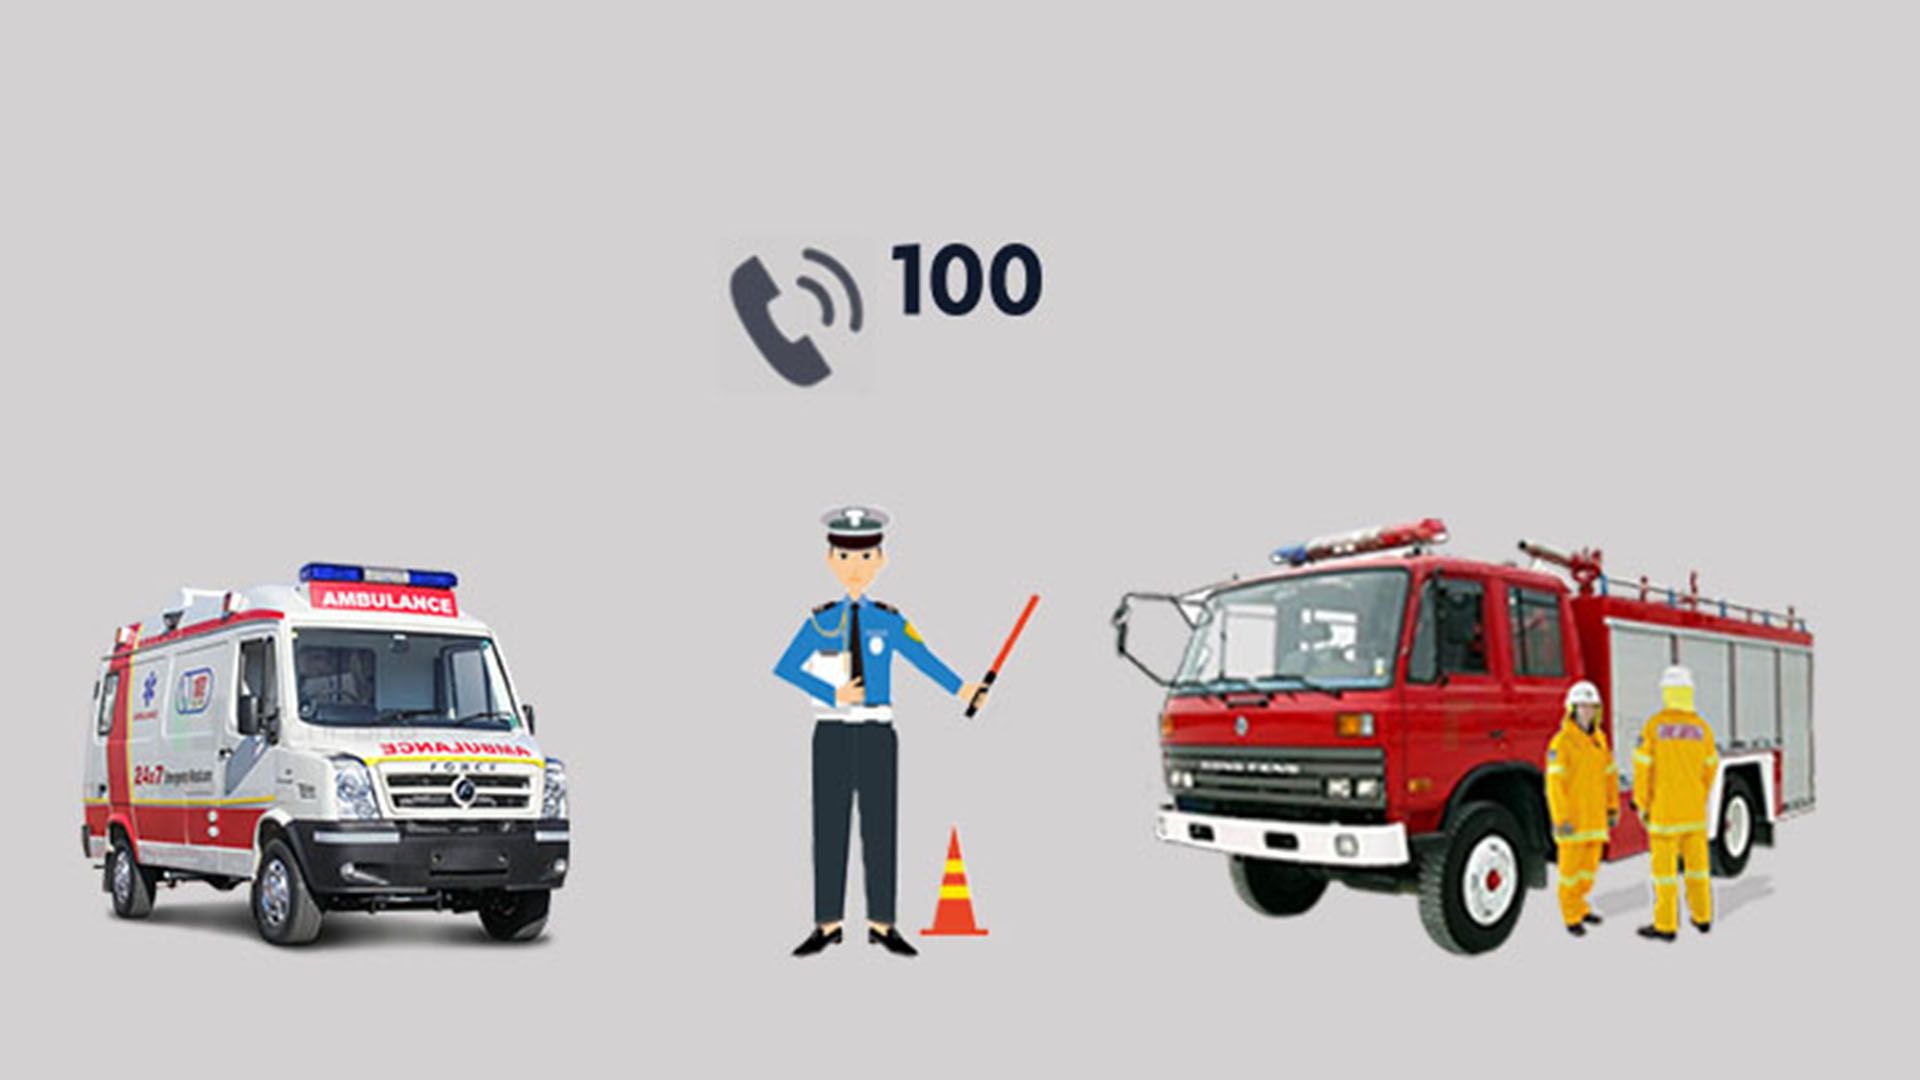 Police, fire brigade and ambulance now have the same number '100' for emergency services